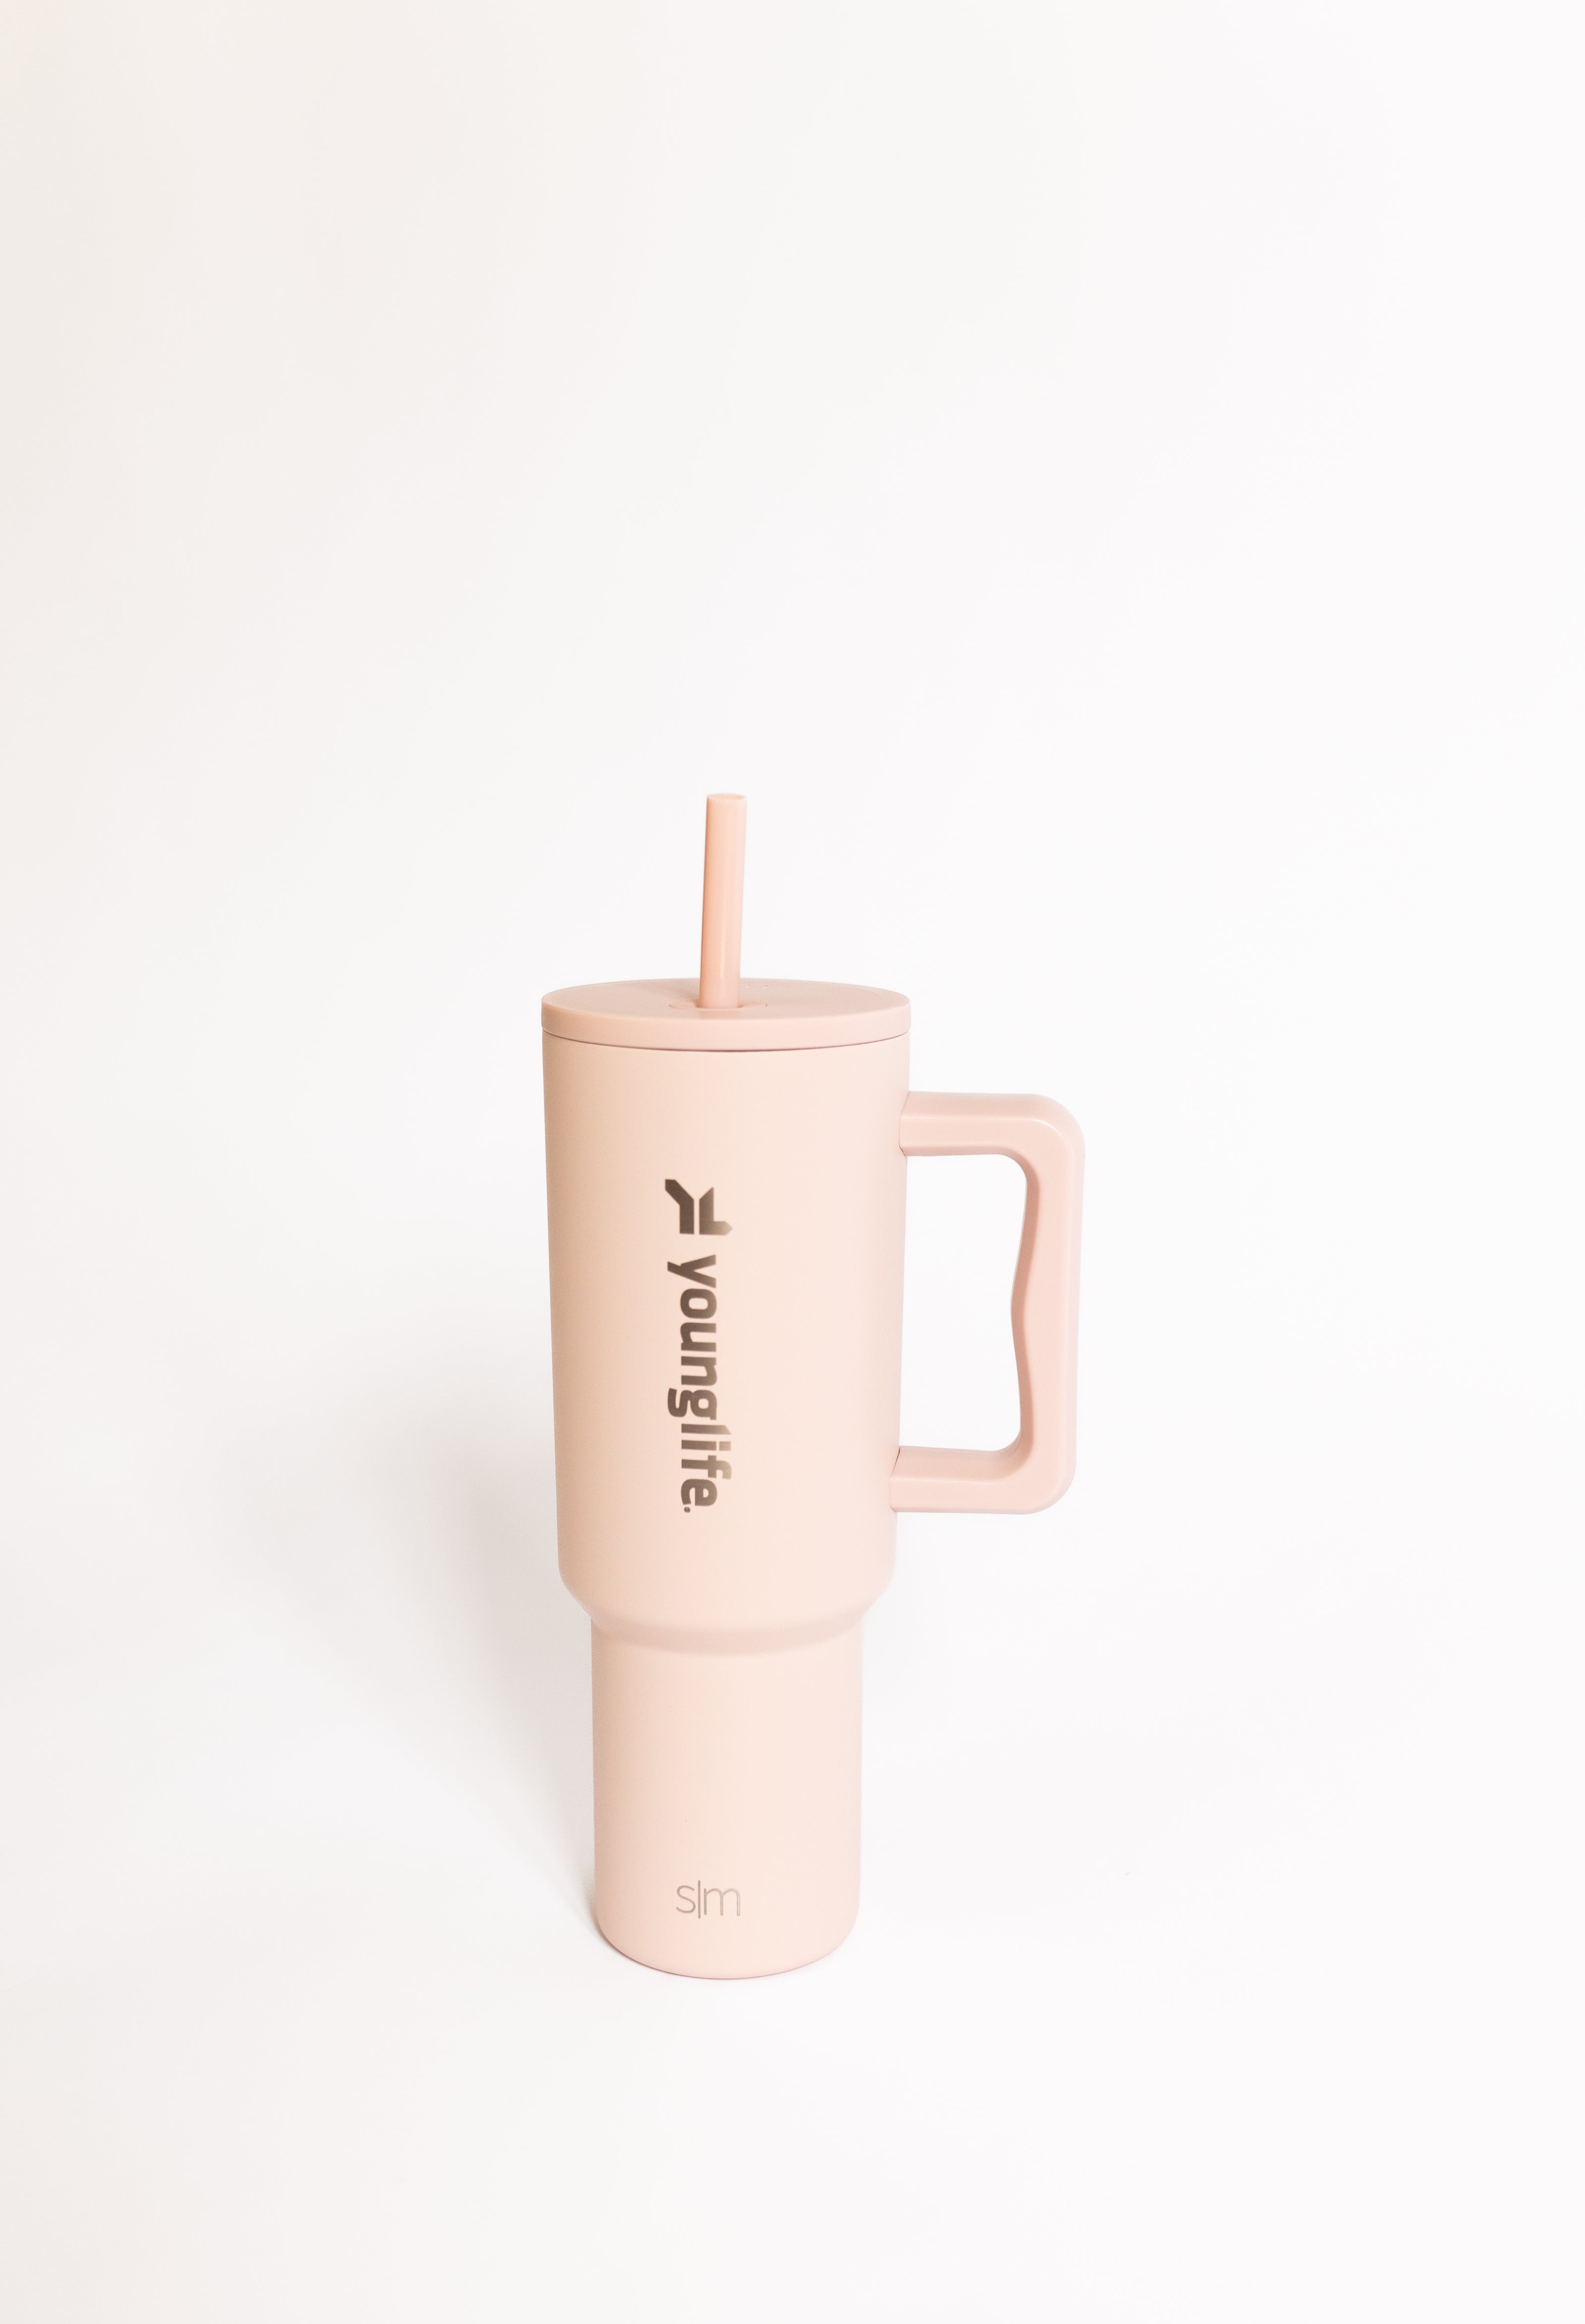 Simple Modern 40 oz Tumbler with … curated on LTK in 2023